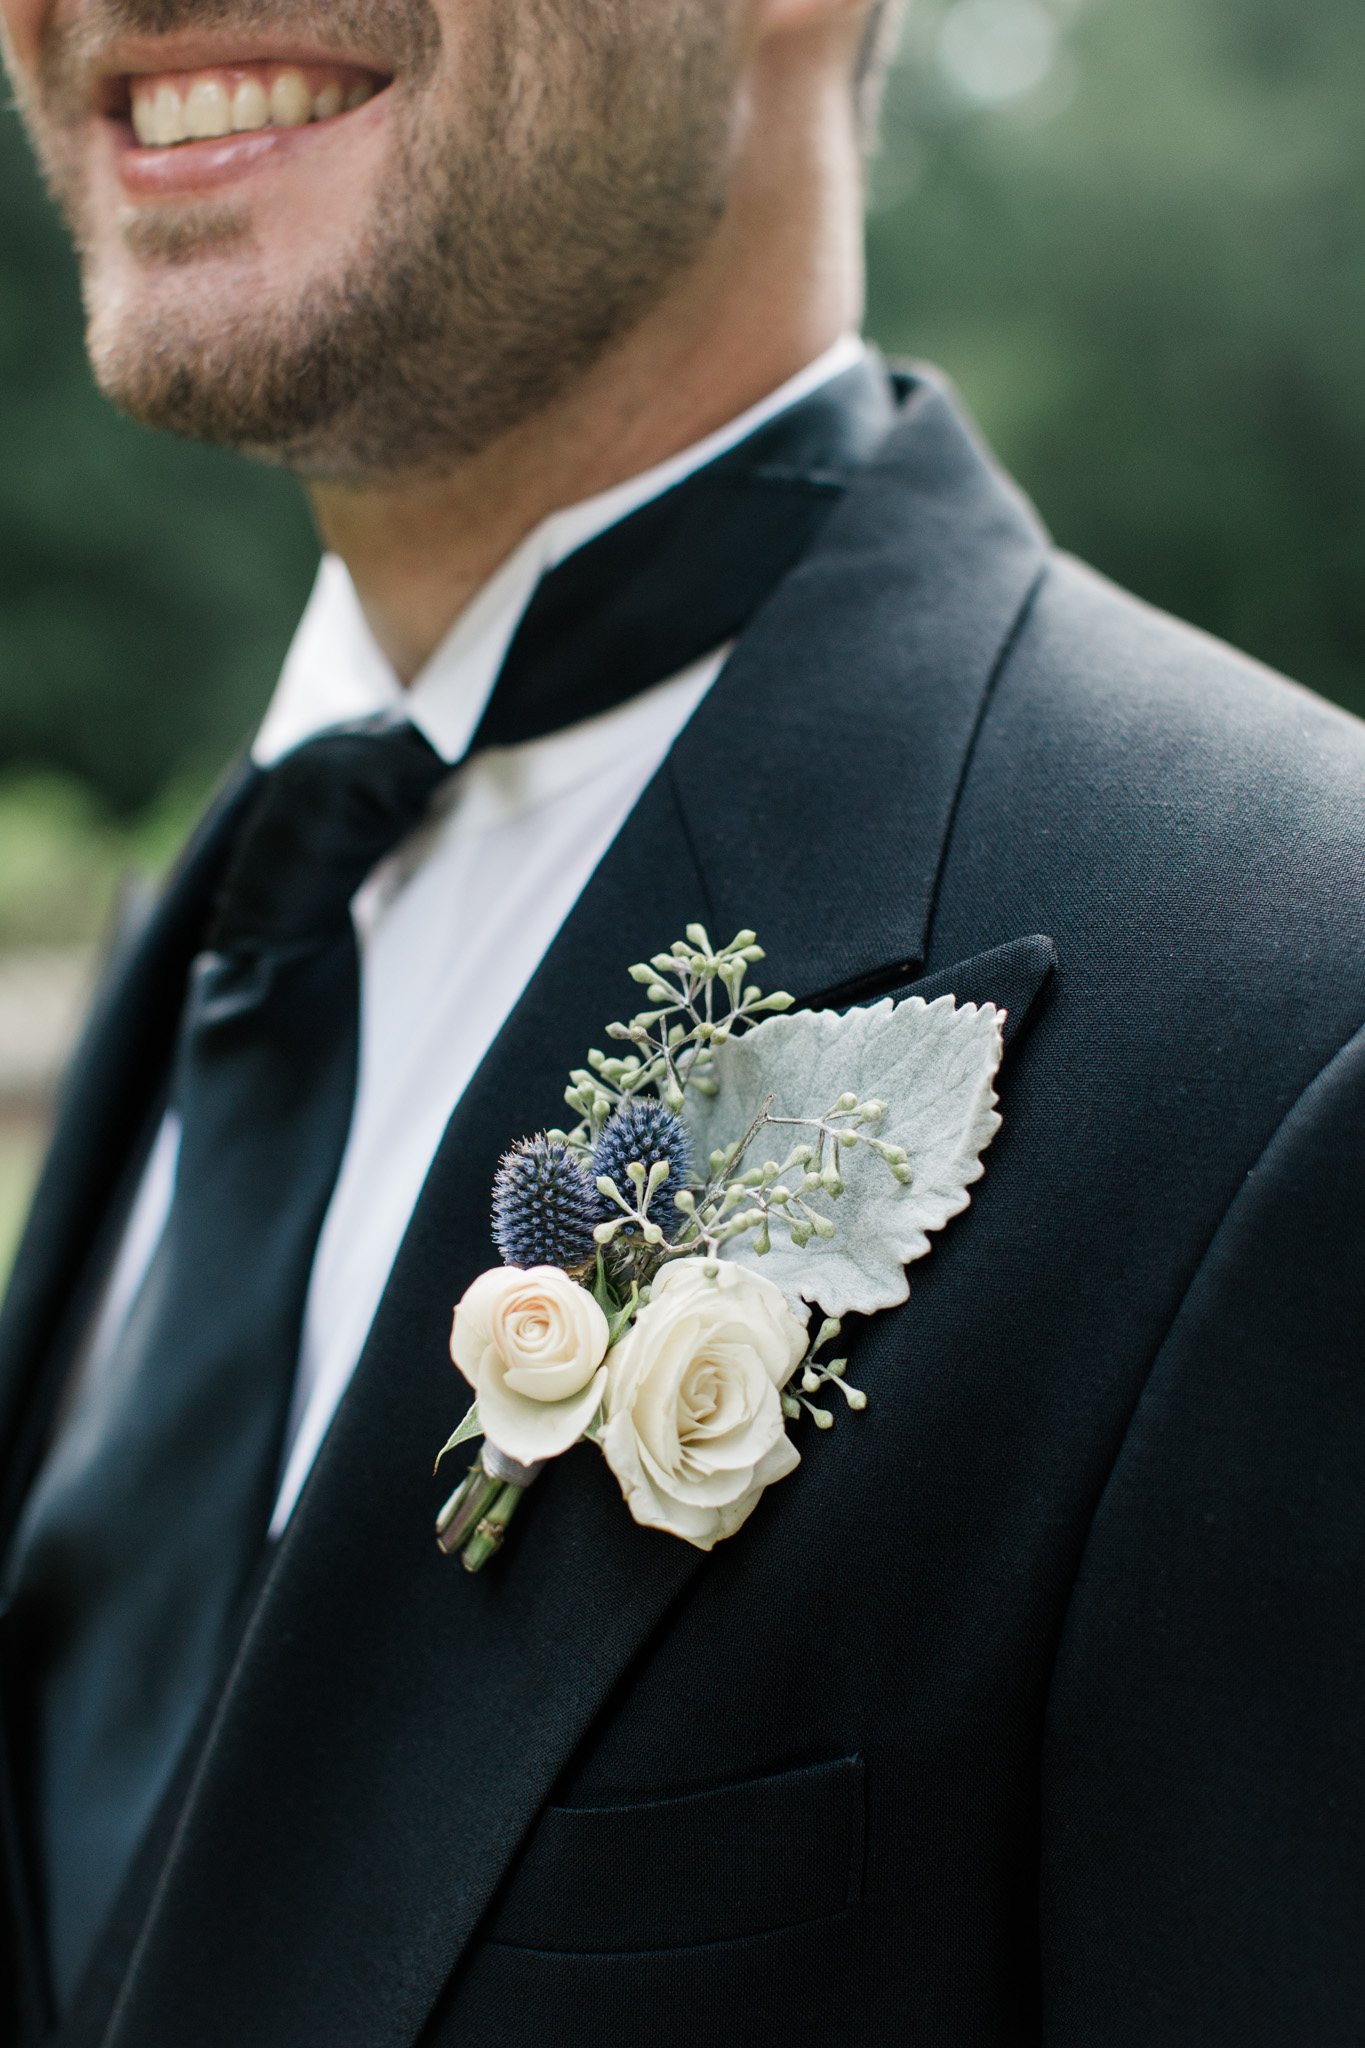 Delicate details are brought together in this groom boutonniere captured by Rebecca Cerasani